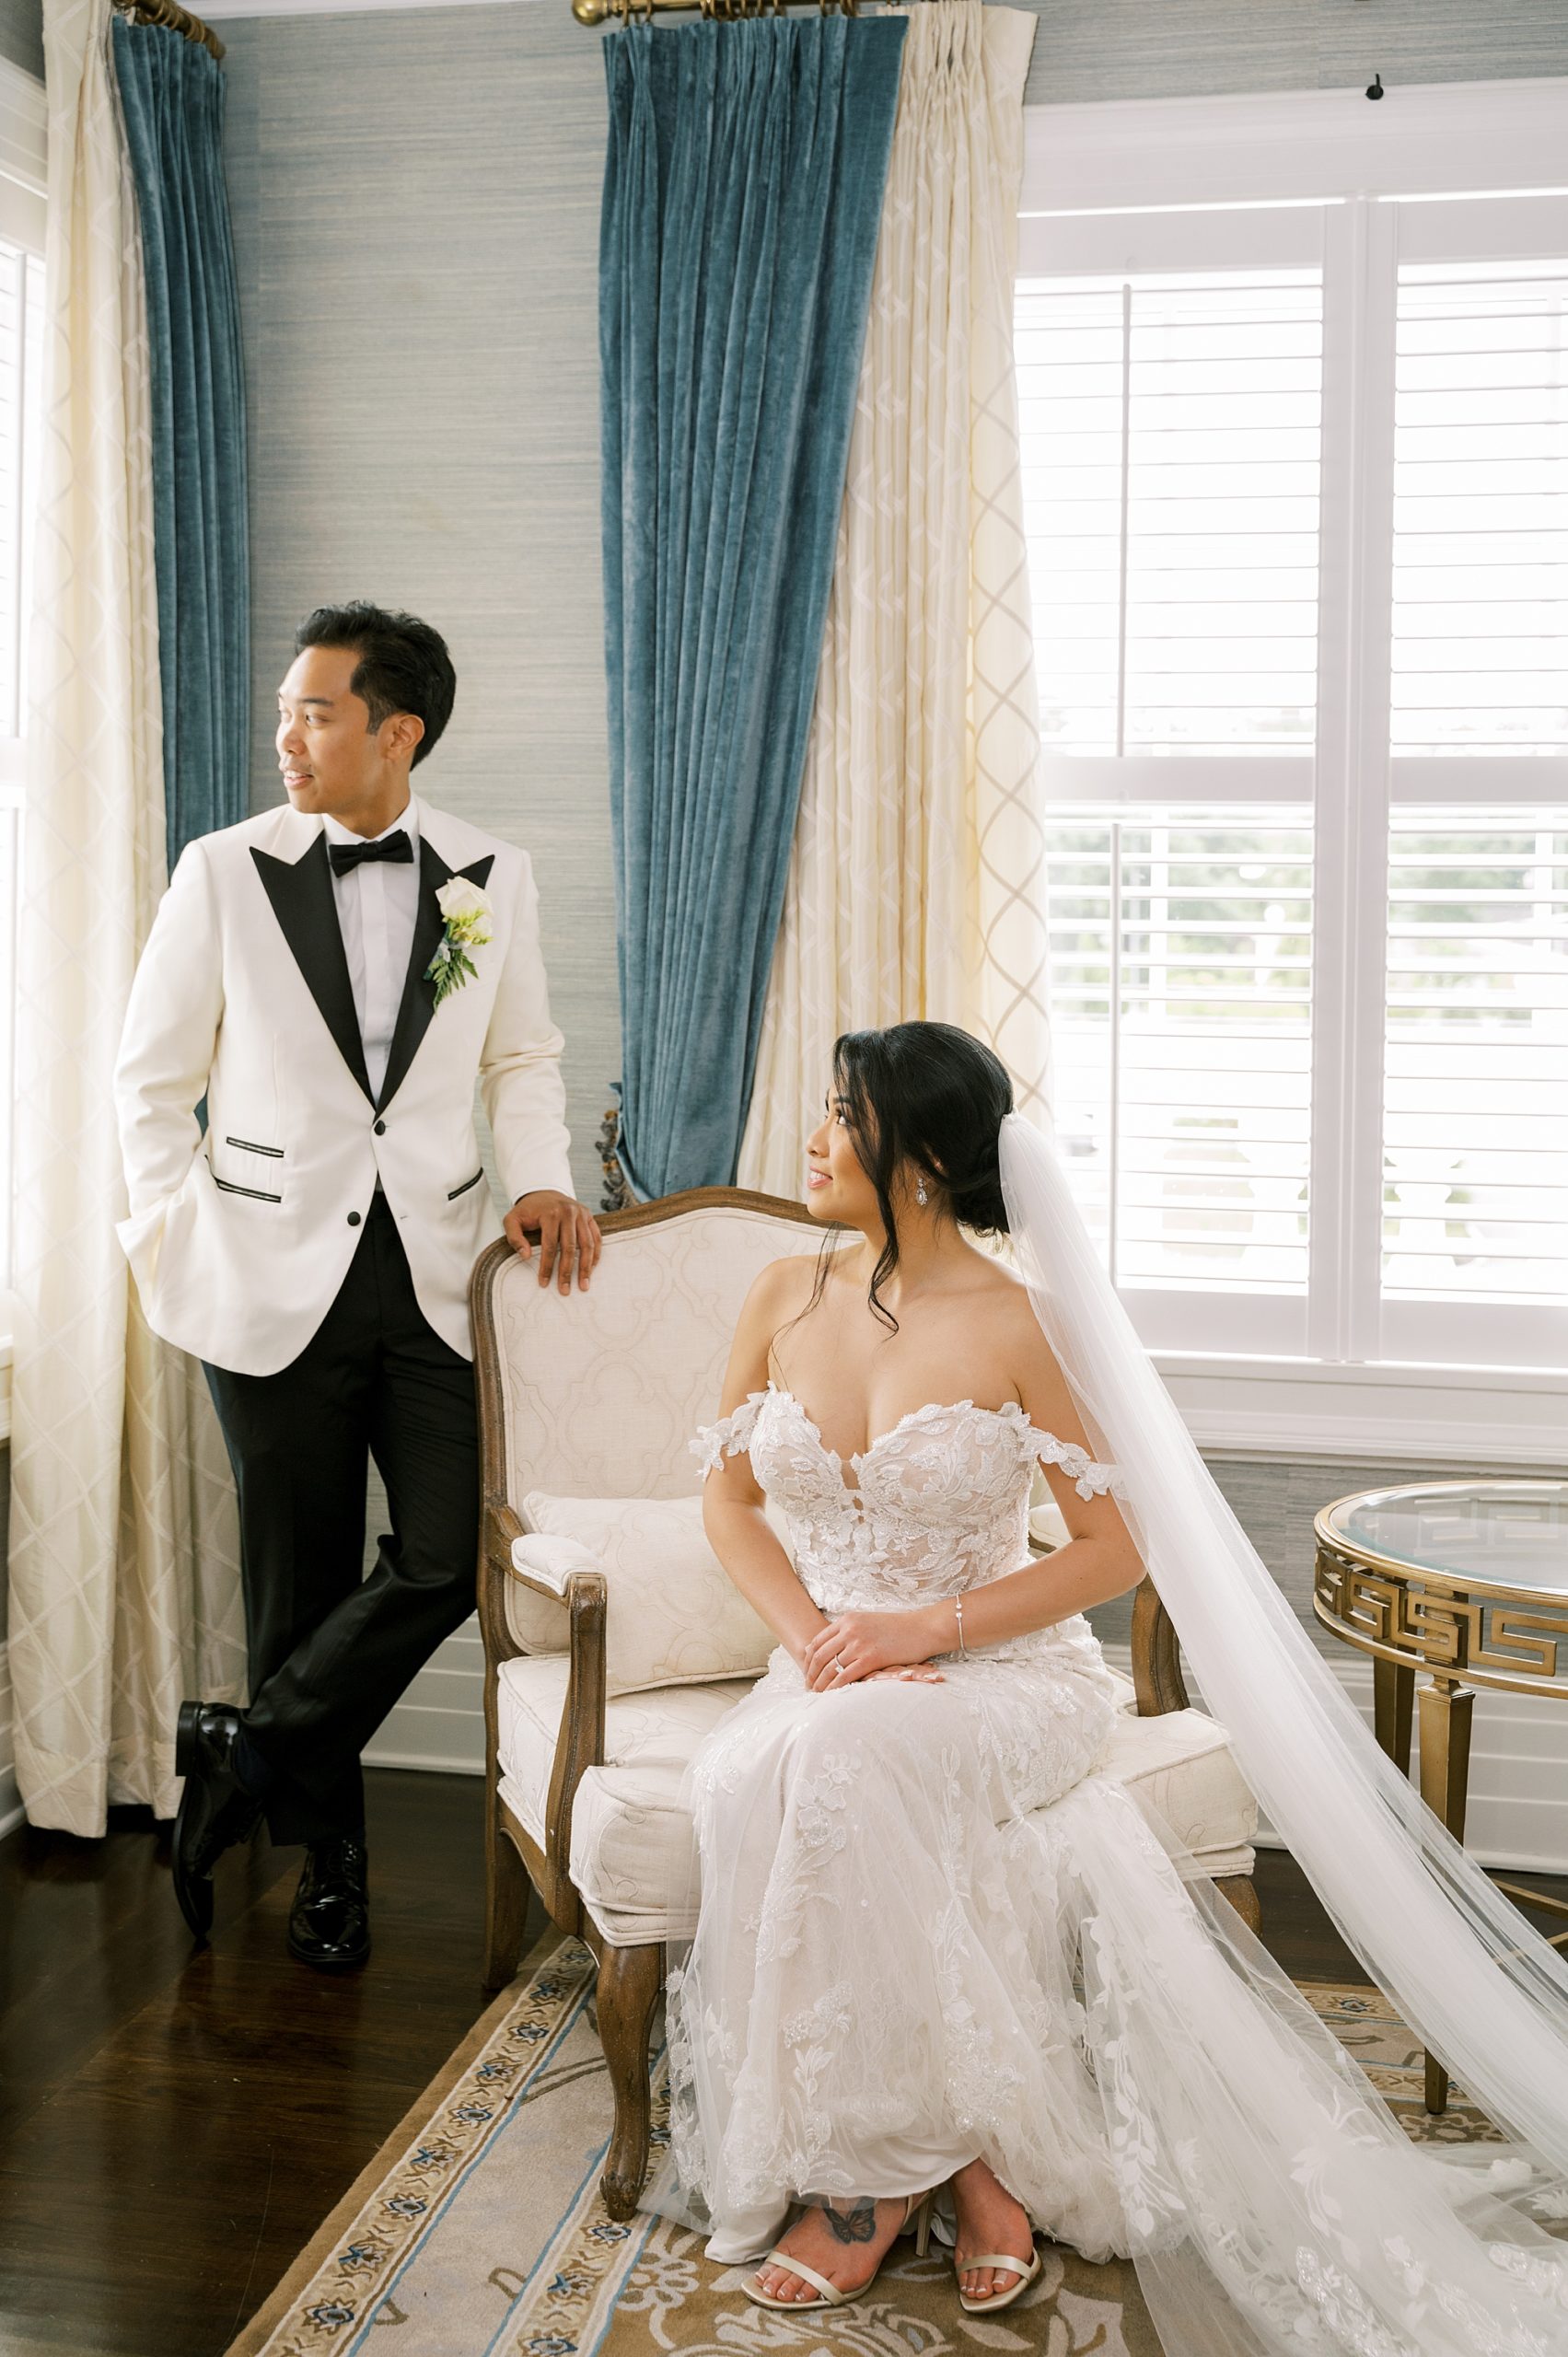 bride sits on white chair while groom stands behind her looking out window